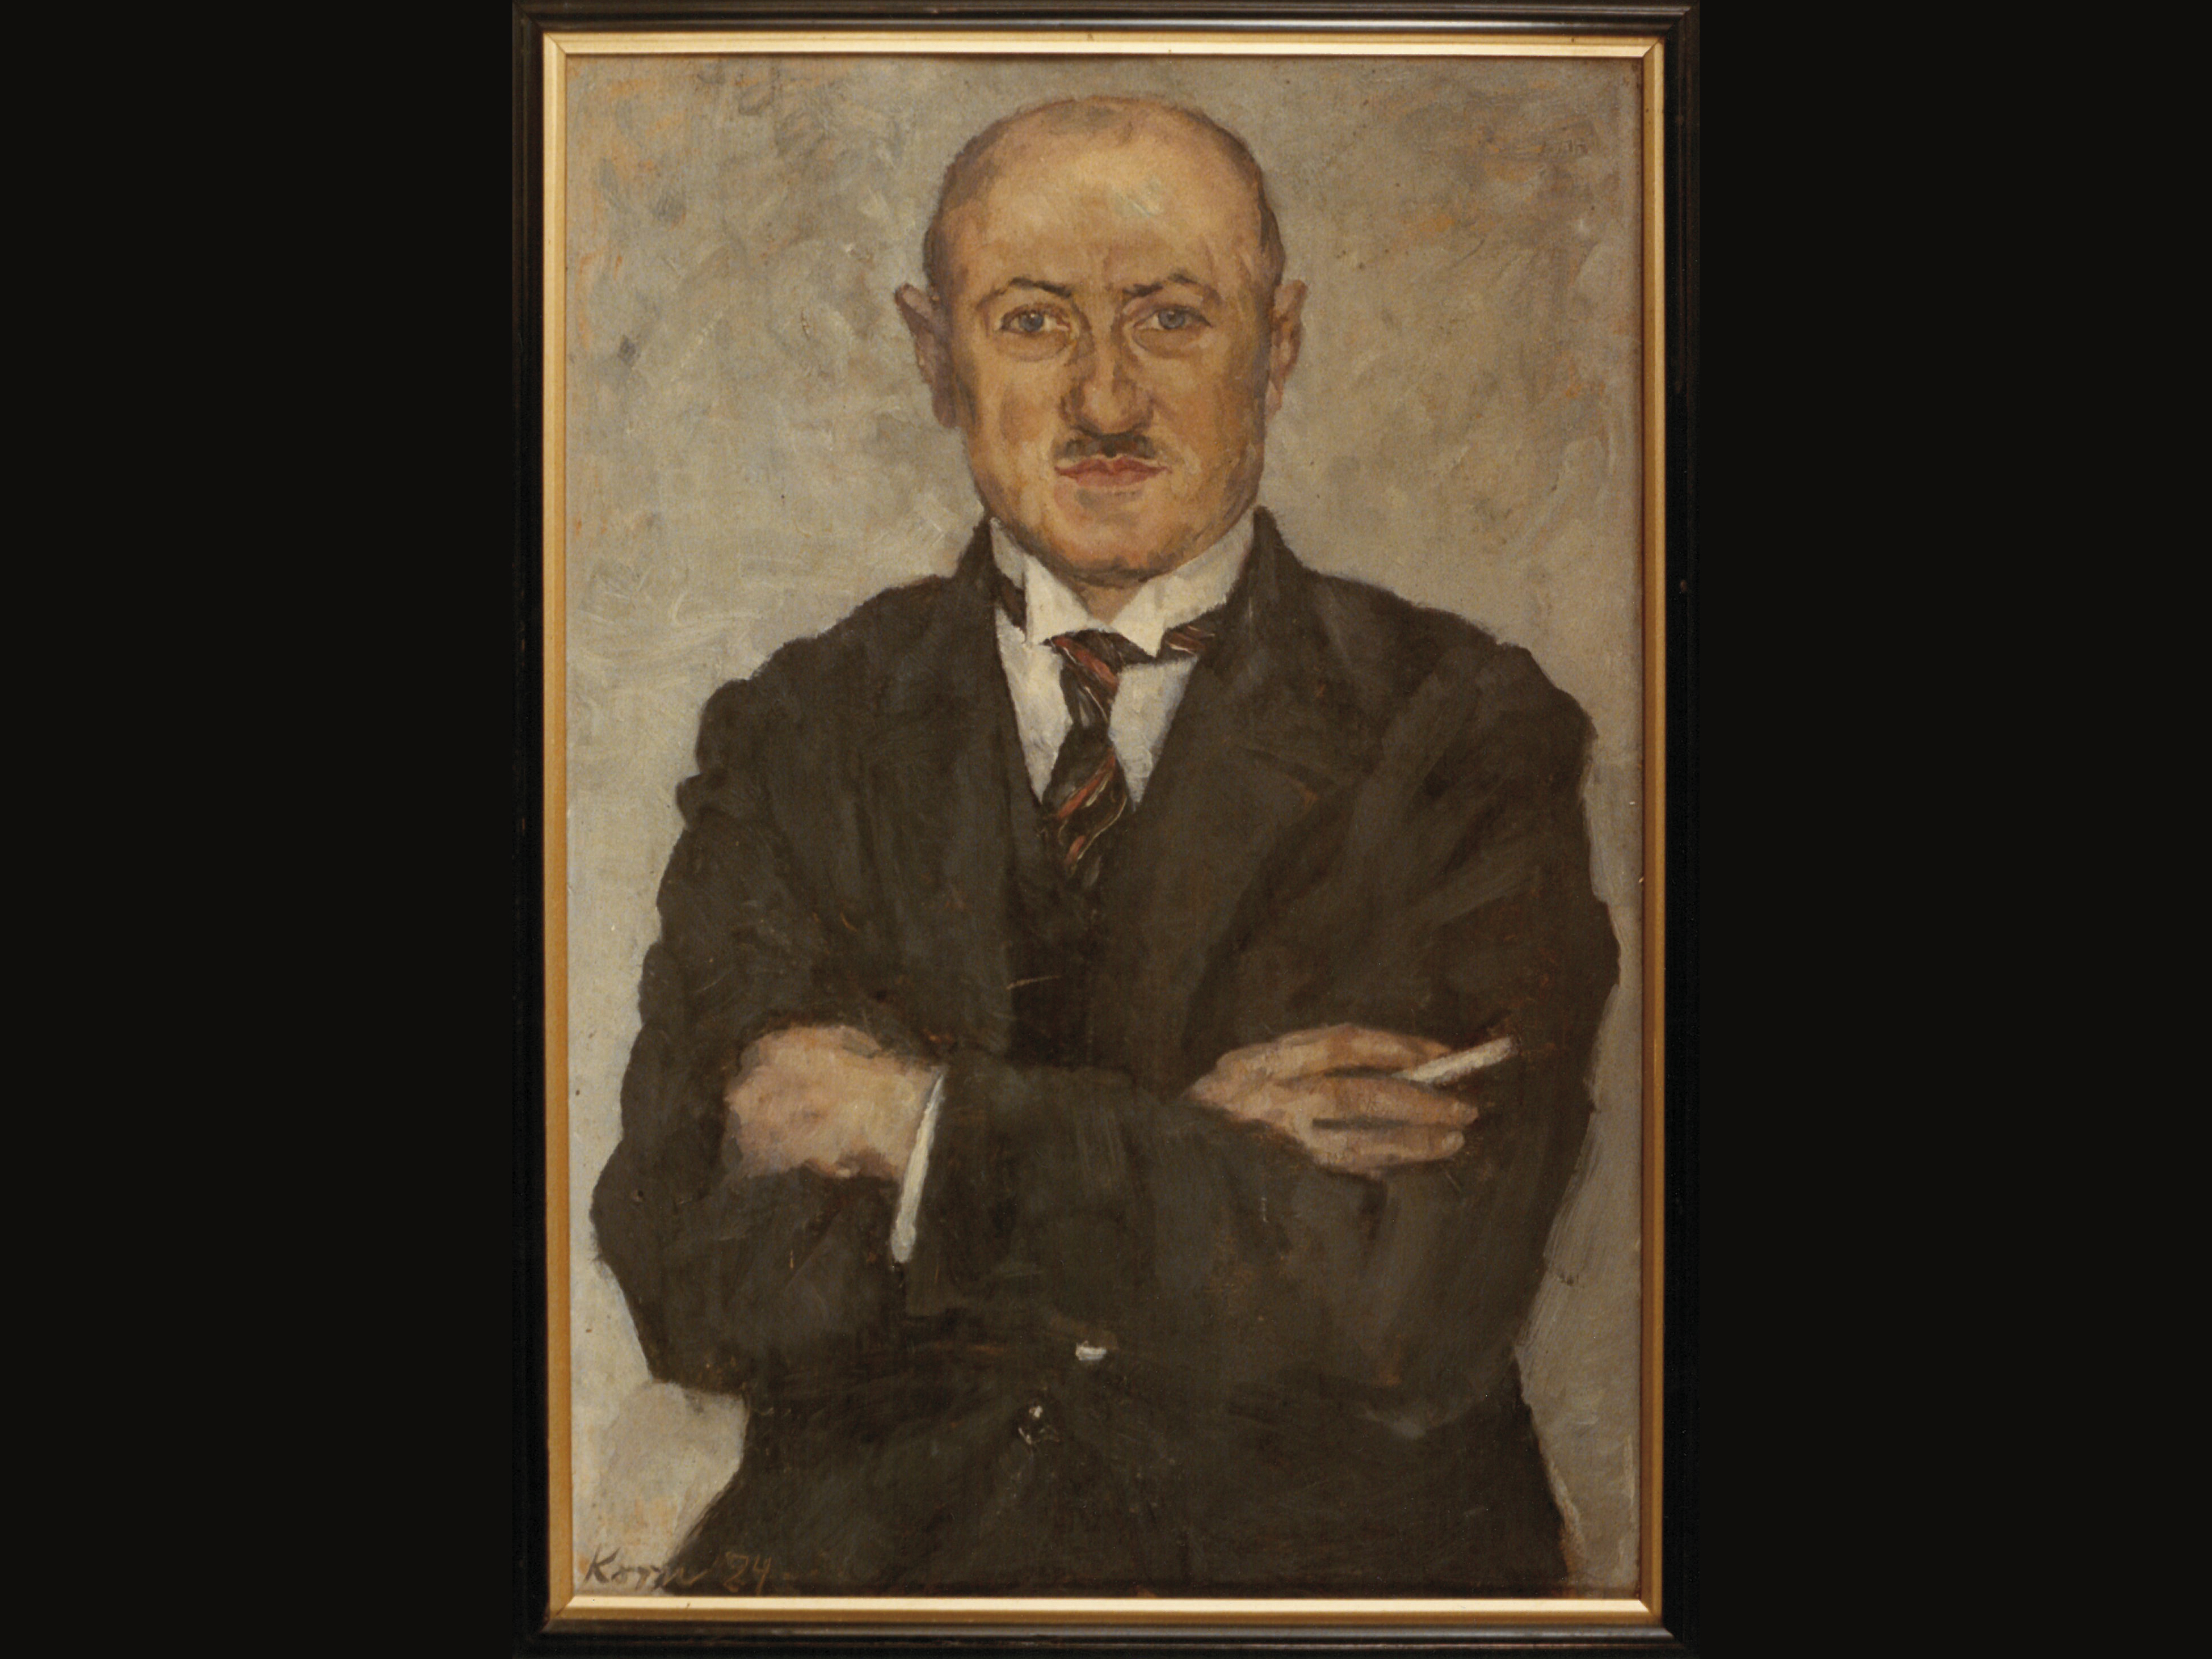 The image shows a painting of the founder of Noris Tachometerwerk Dr. Guggenheimer